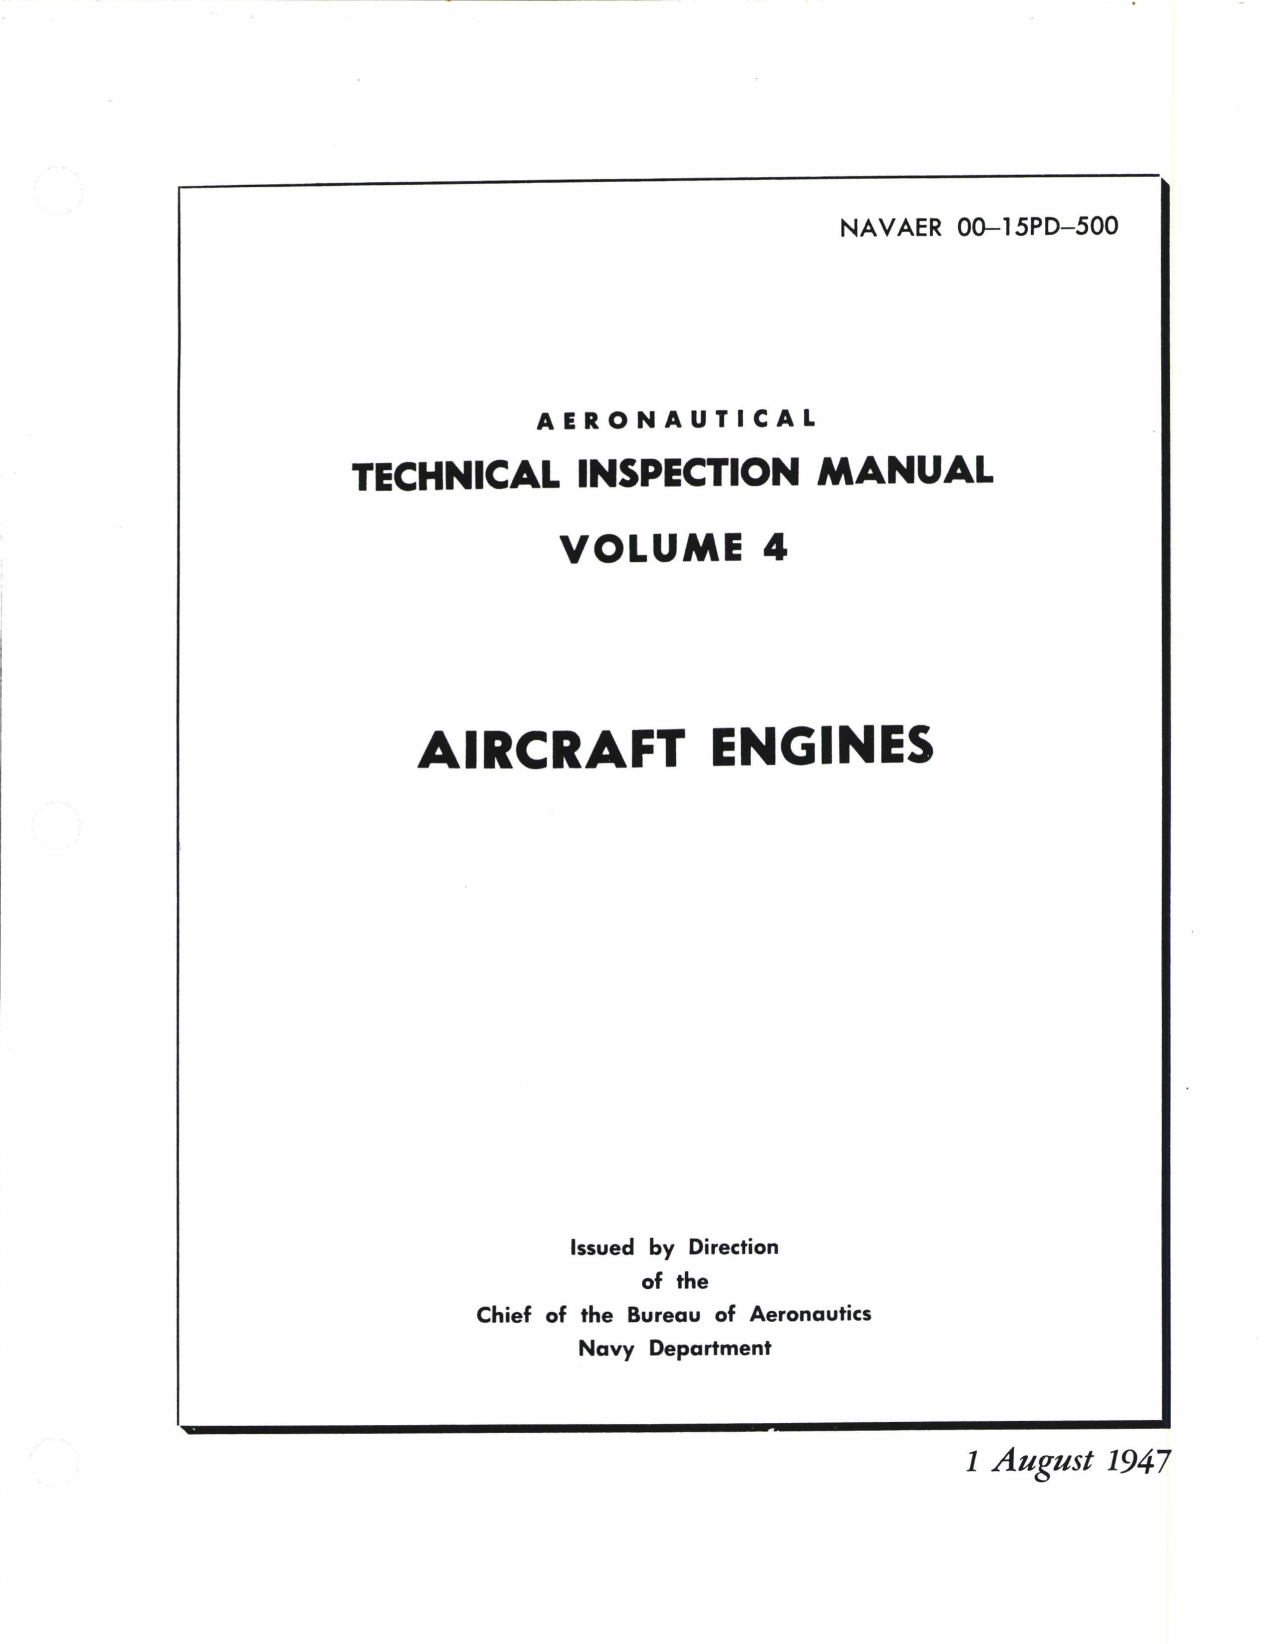 Sample page 1 from AirCorps Library document: Aeronautical Technical Inspection Manual Volume 4, Aircraft Engine